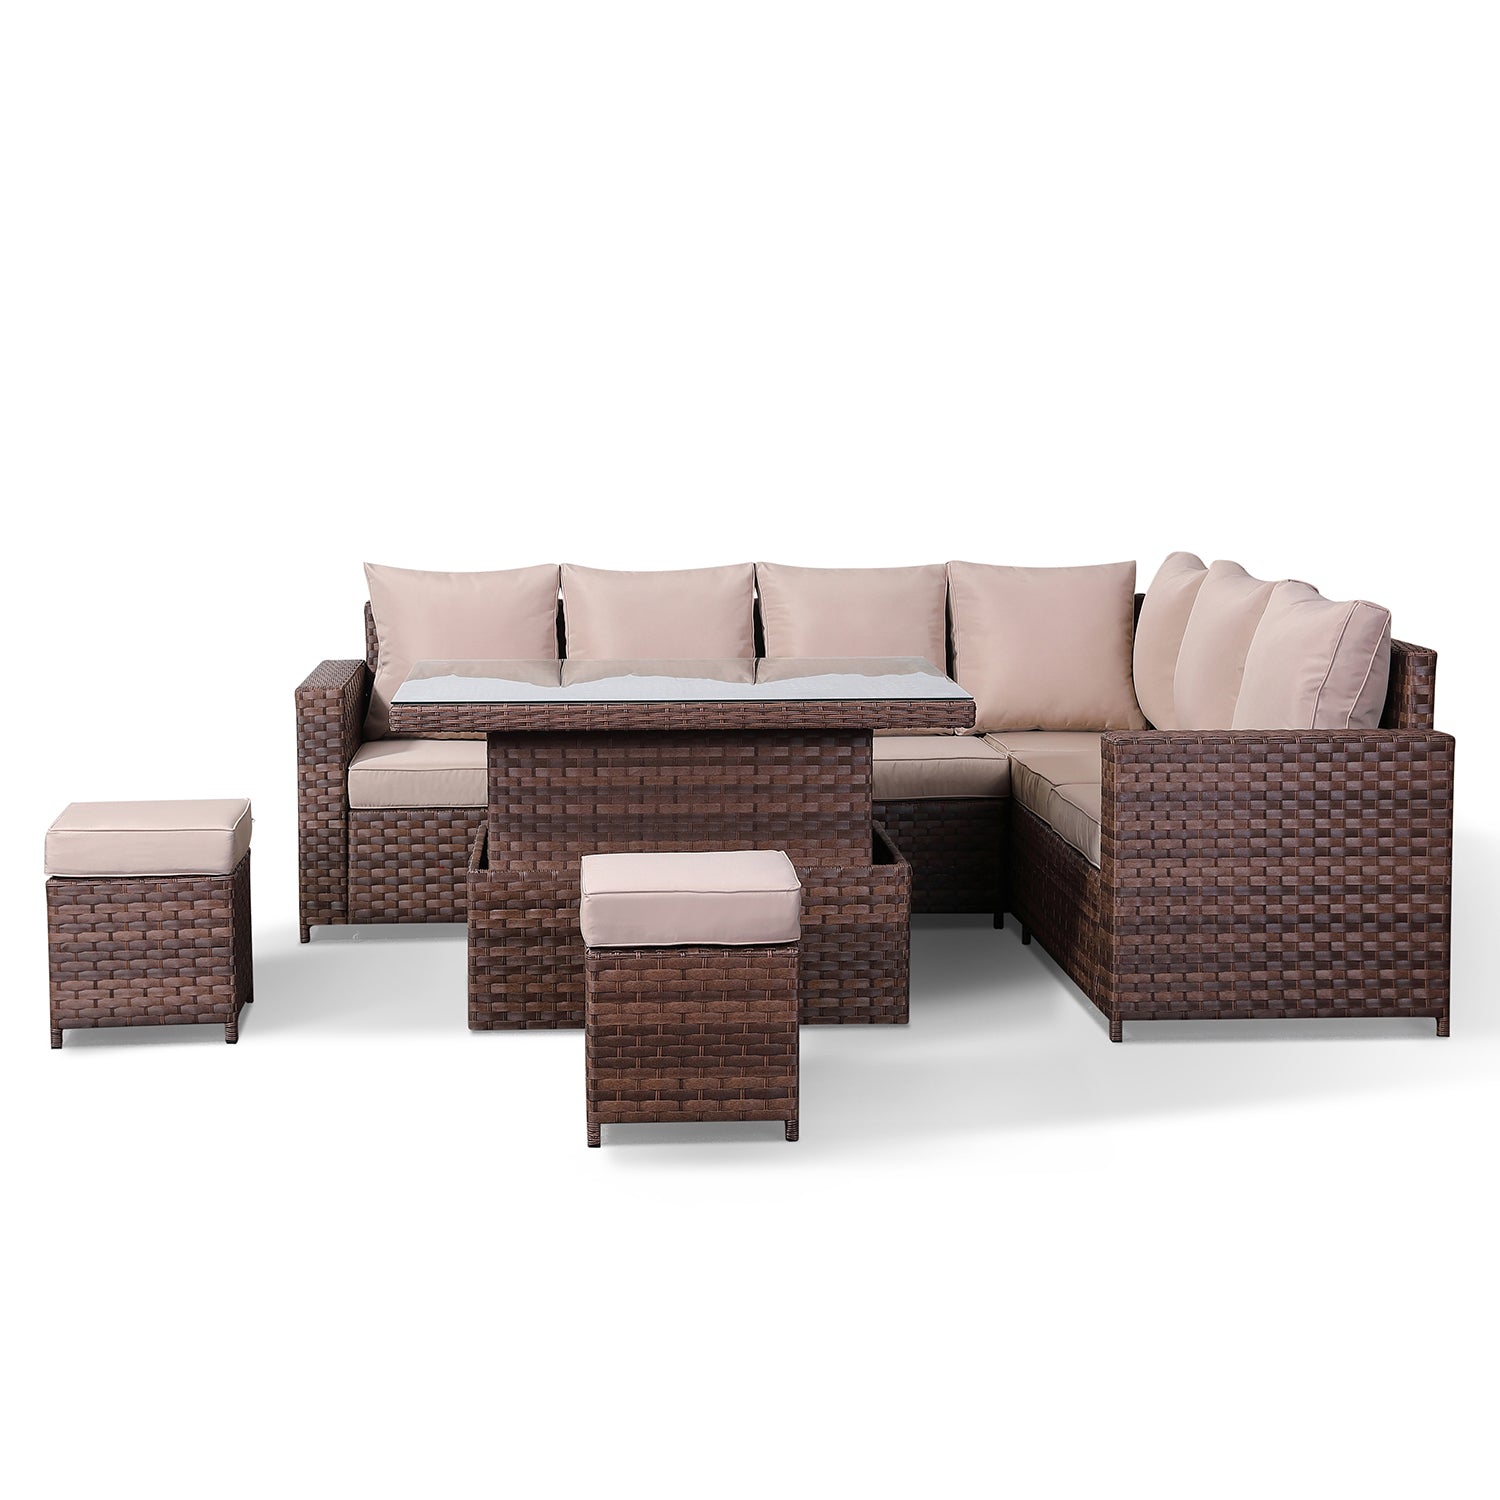 Canna Range High Back RHF Large Dining Corner Sofa Set with Lift & Rise Table In Brown